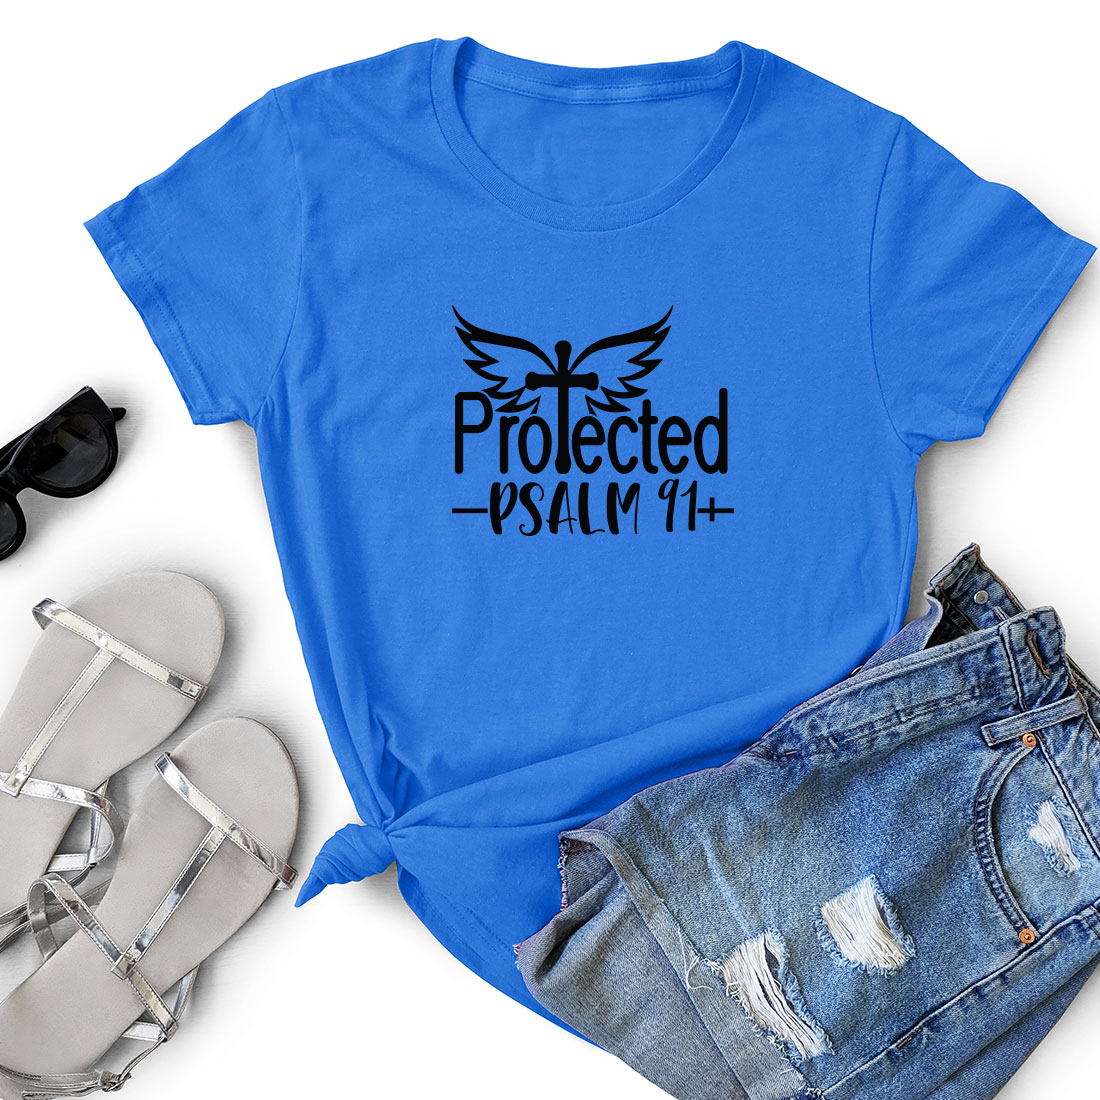 Blue t - shirt with the word projected on it next to a pair of.